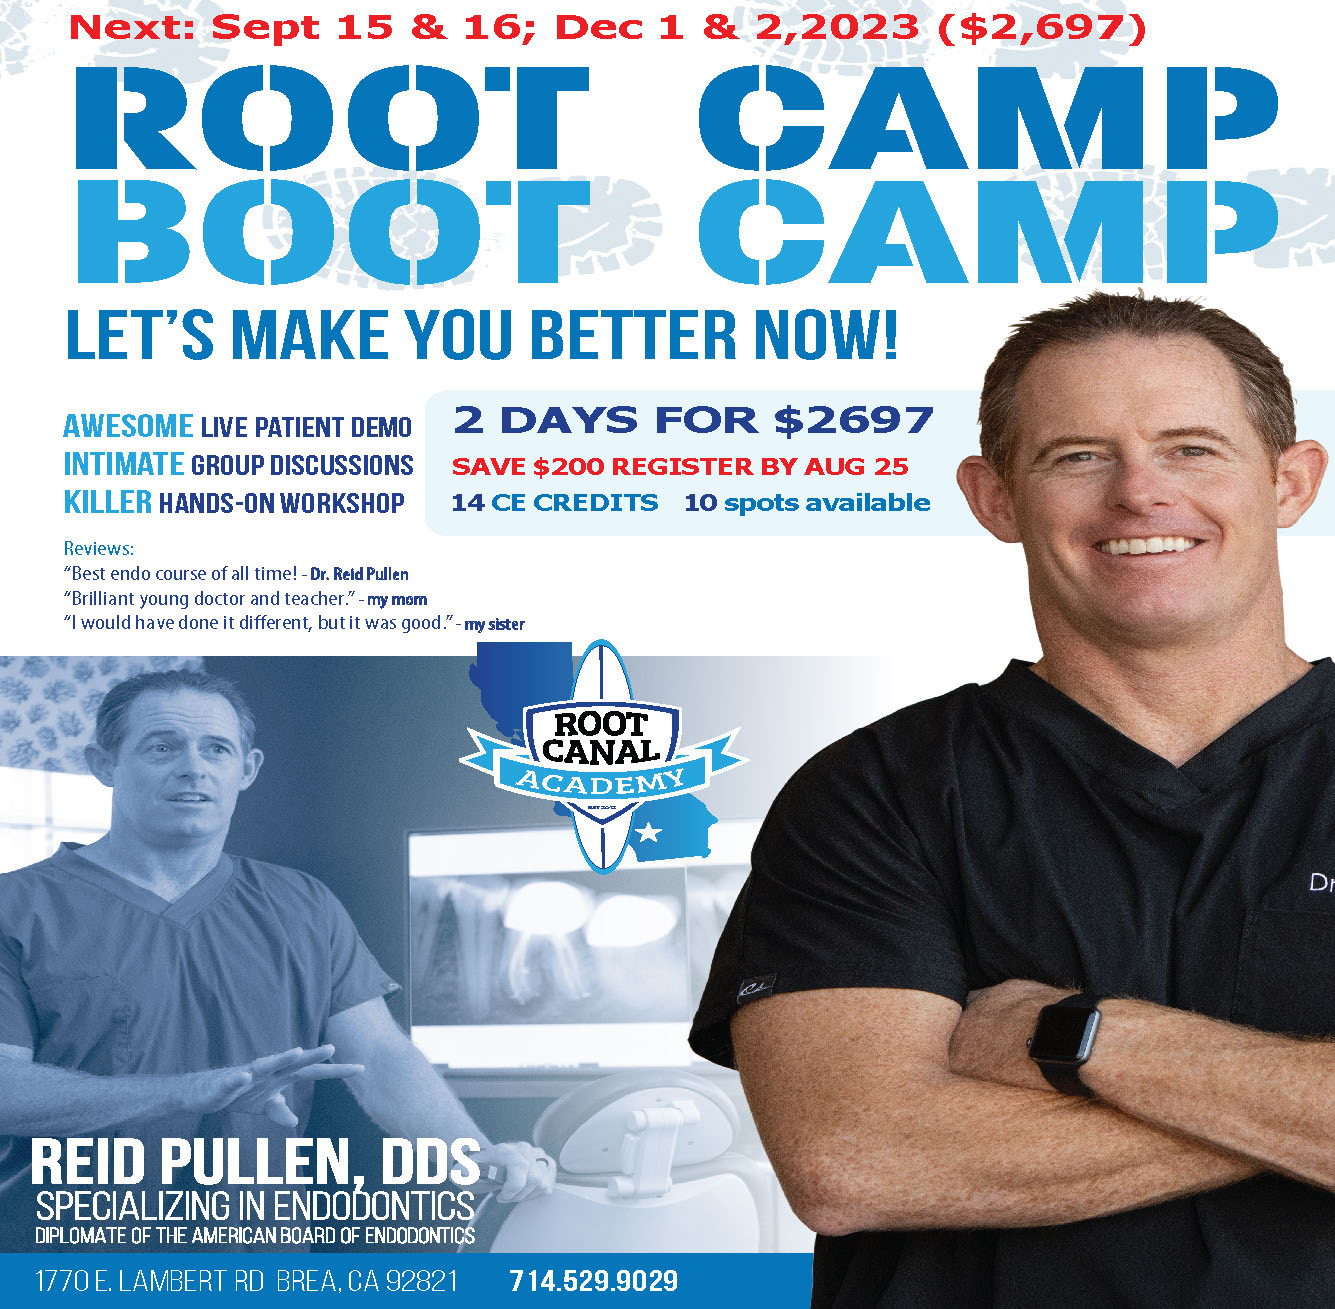 Root Camp Boot Camp